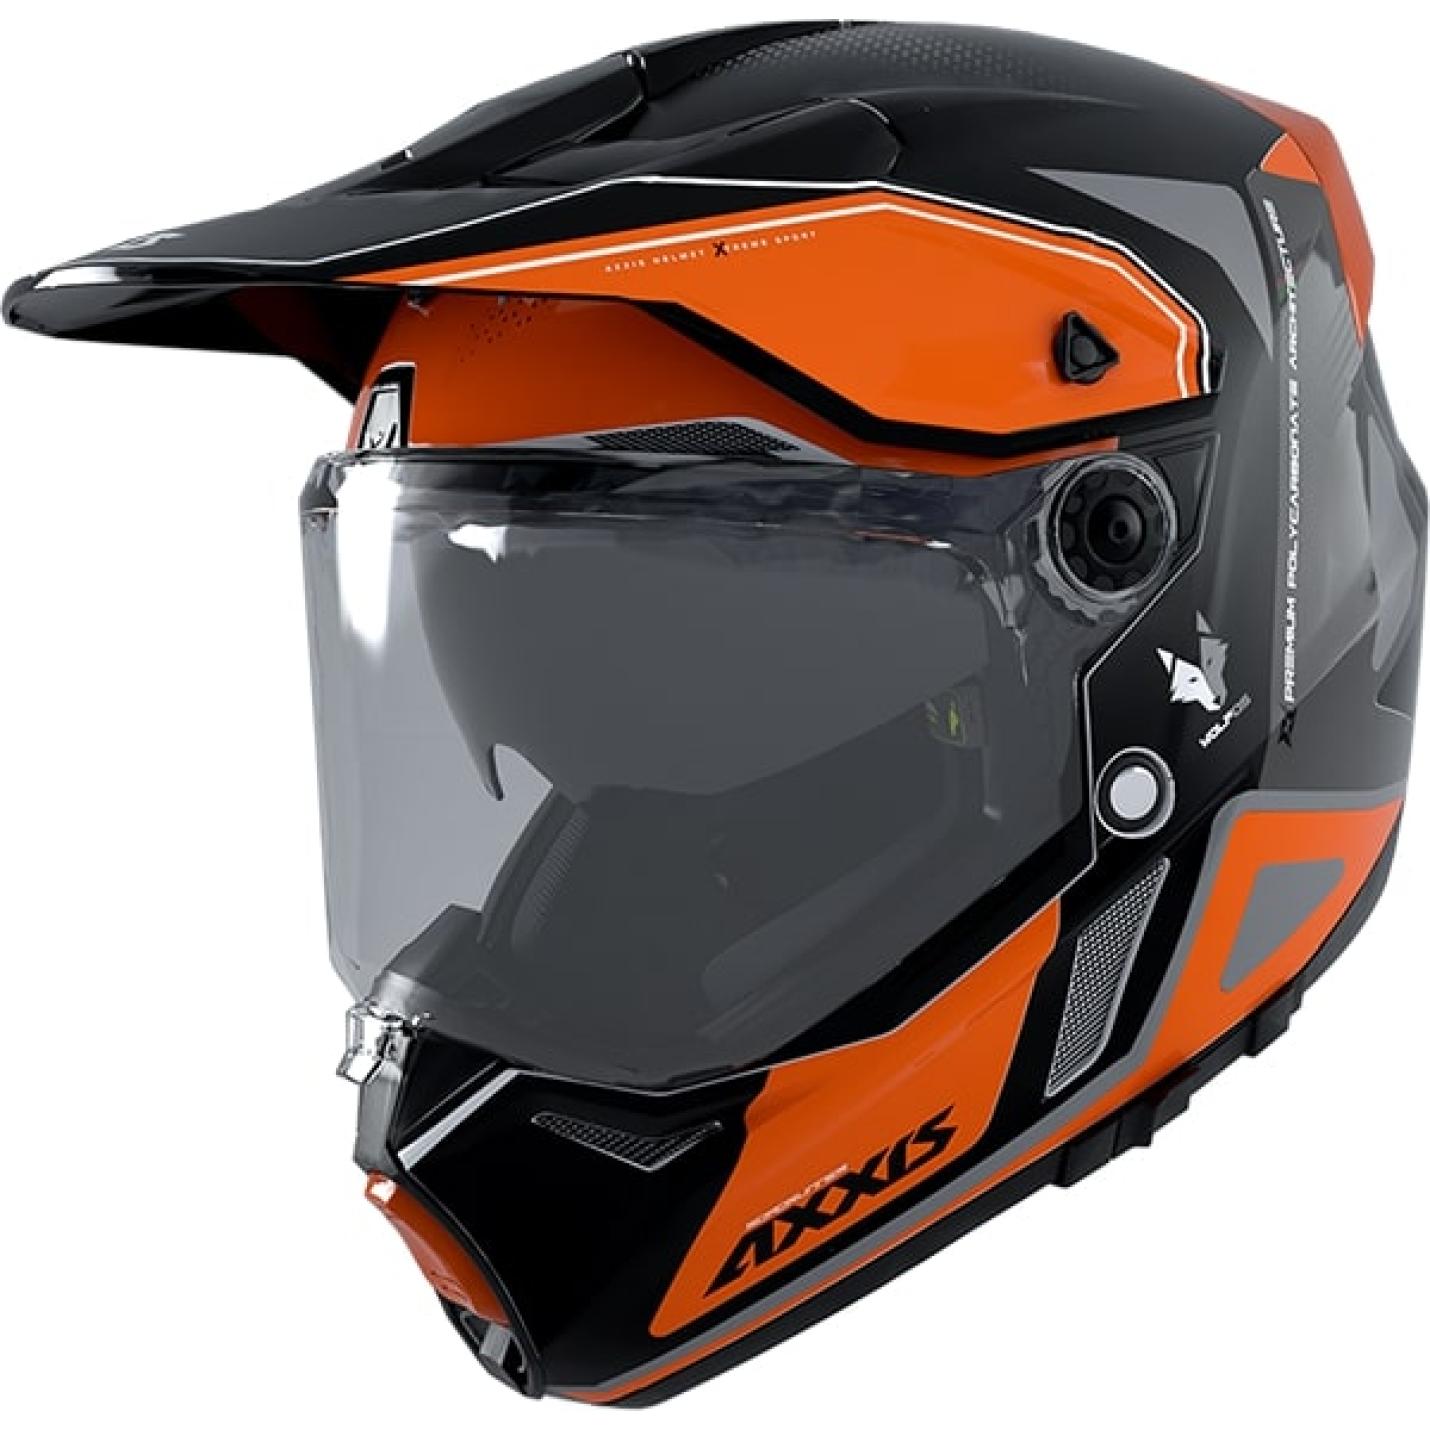 Helm Axxis Wolf DS Roadrunner Mat Oranje M AE-trading